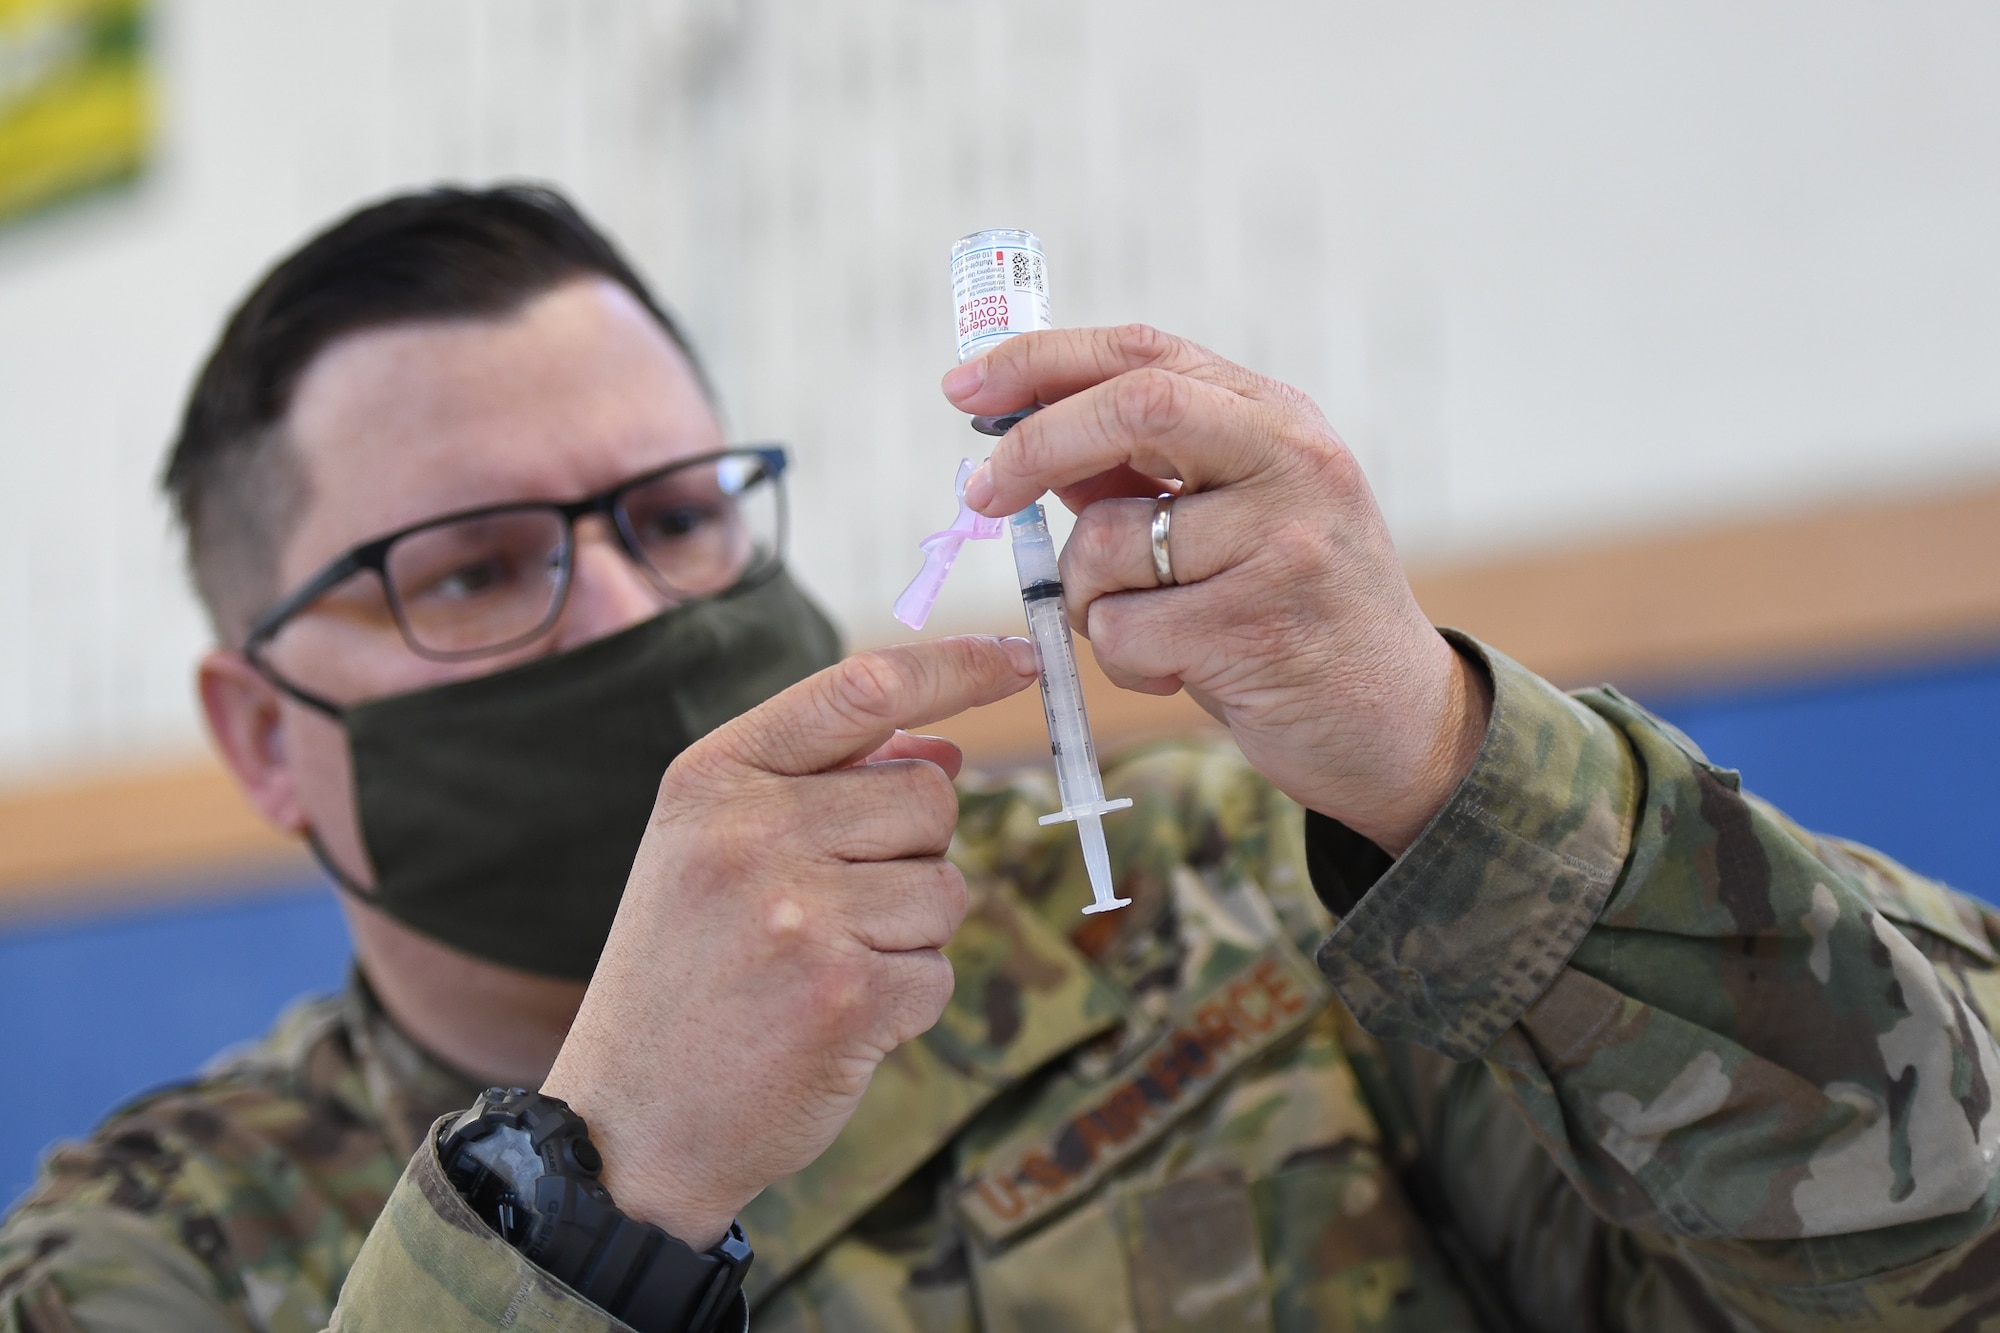 Master Sgt. Joshua Dennis, 66th Medical Squadron medical operations technician, prepares a COVID-19 vaccination dose at Hanscom Air Force Base, Mass., April 9. The 66 MDS currently has an increased vaccine availability for all personnel with a valid Department of Defense identification card. (U.S. Air Force photo by Mark Herlihy)